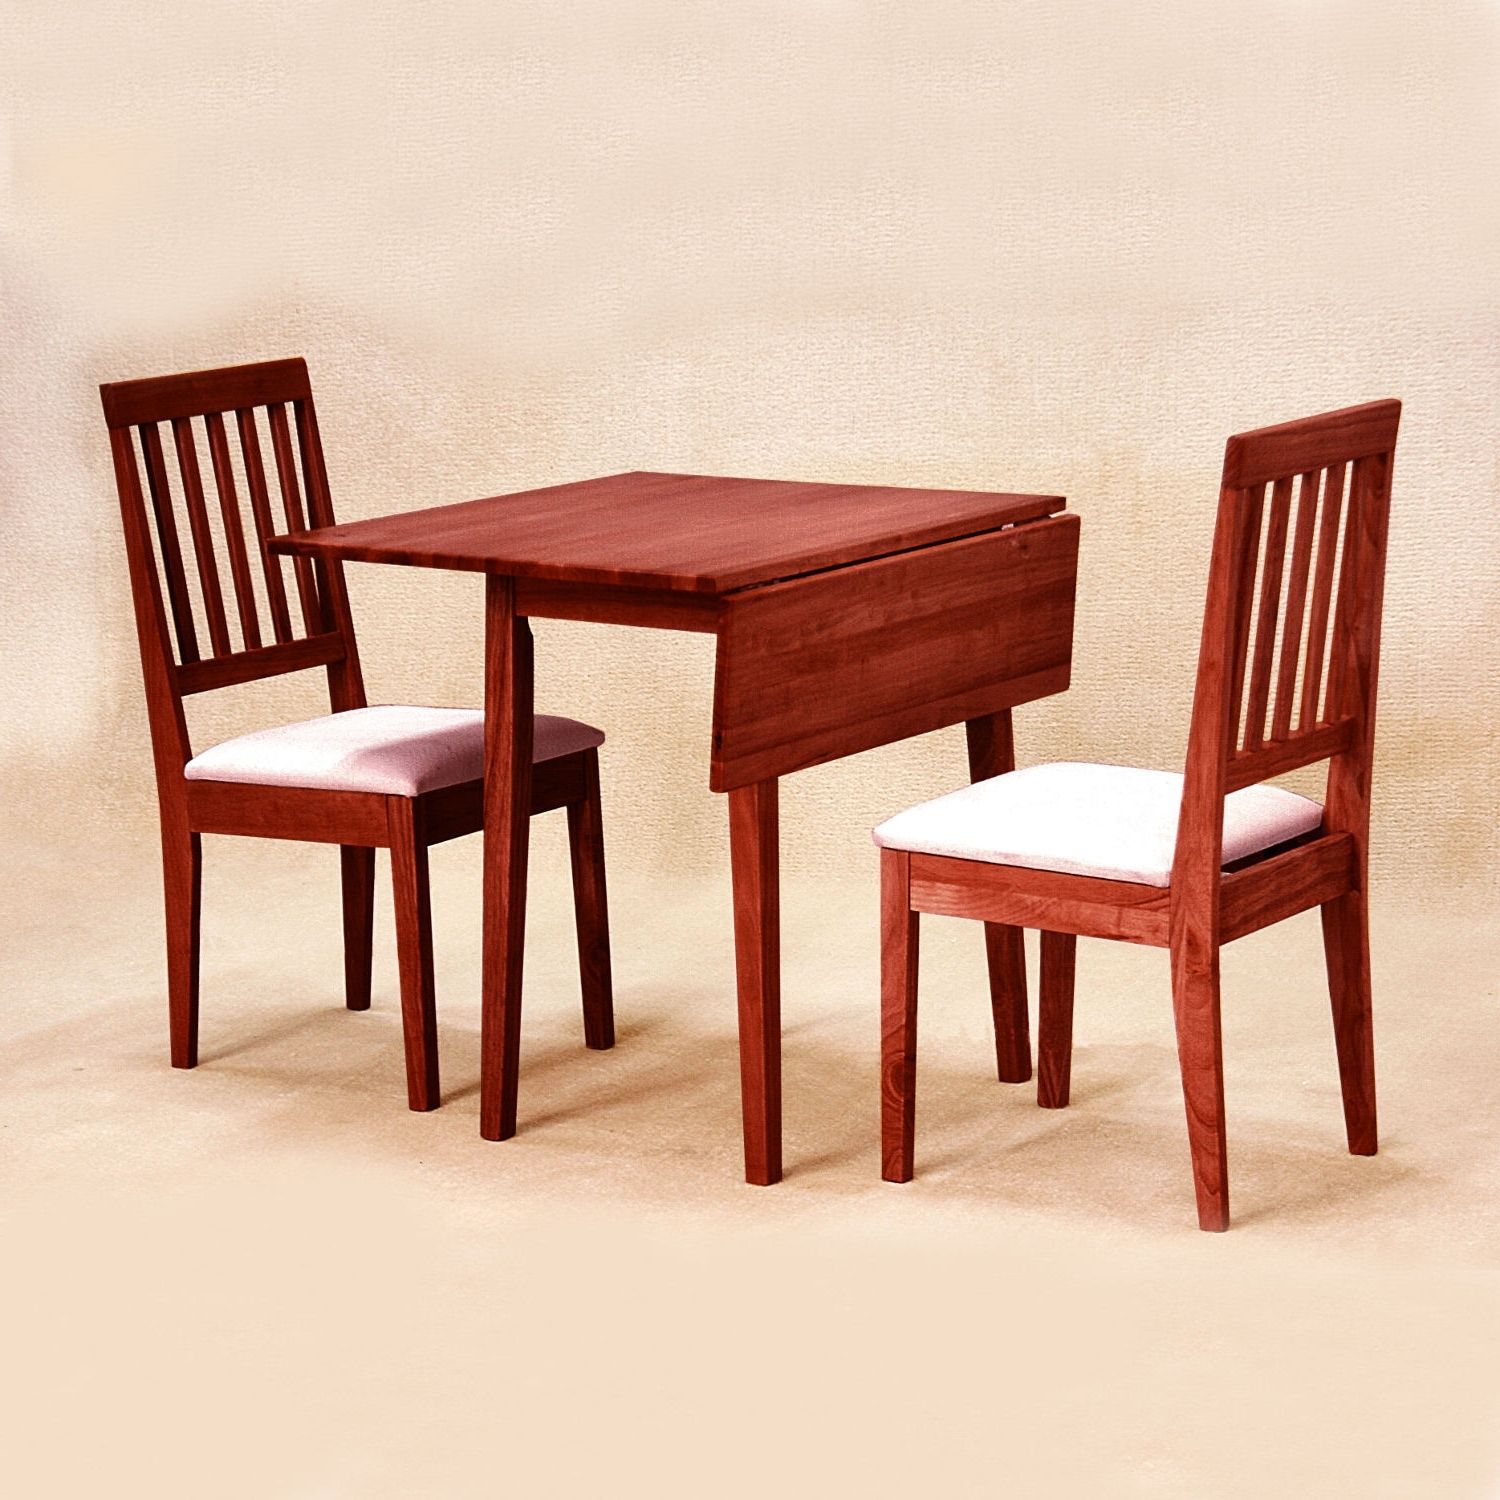 Latest Two Seater Dining Tables And Chairs Pertaining To Two Chair Dining Table Two Chair Dining Table (View 19 of 25)